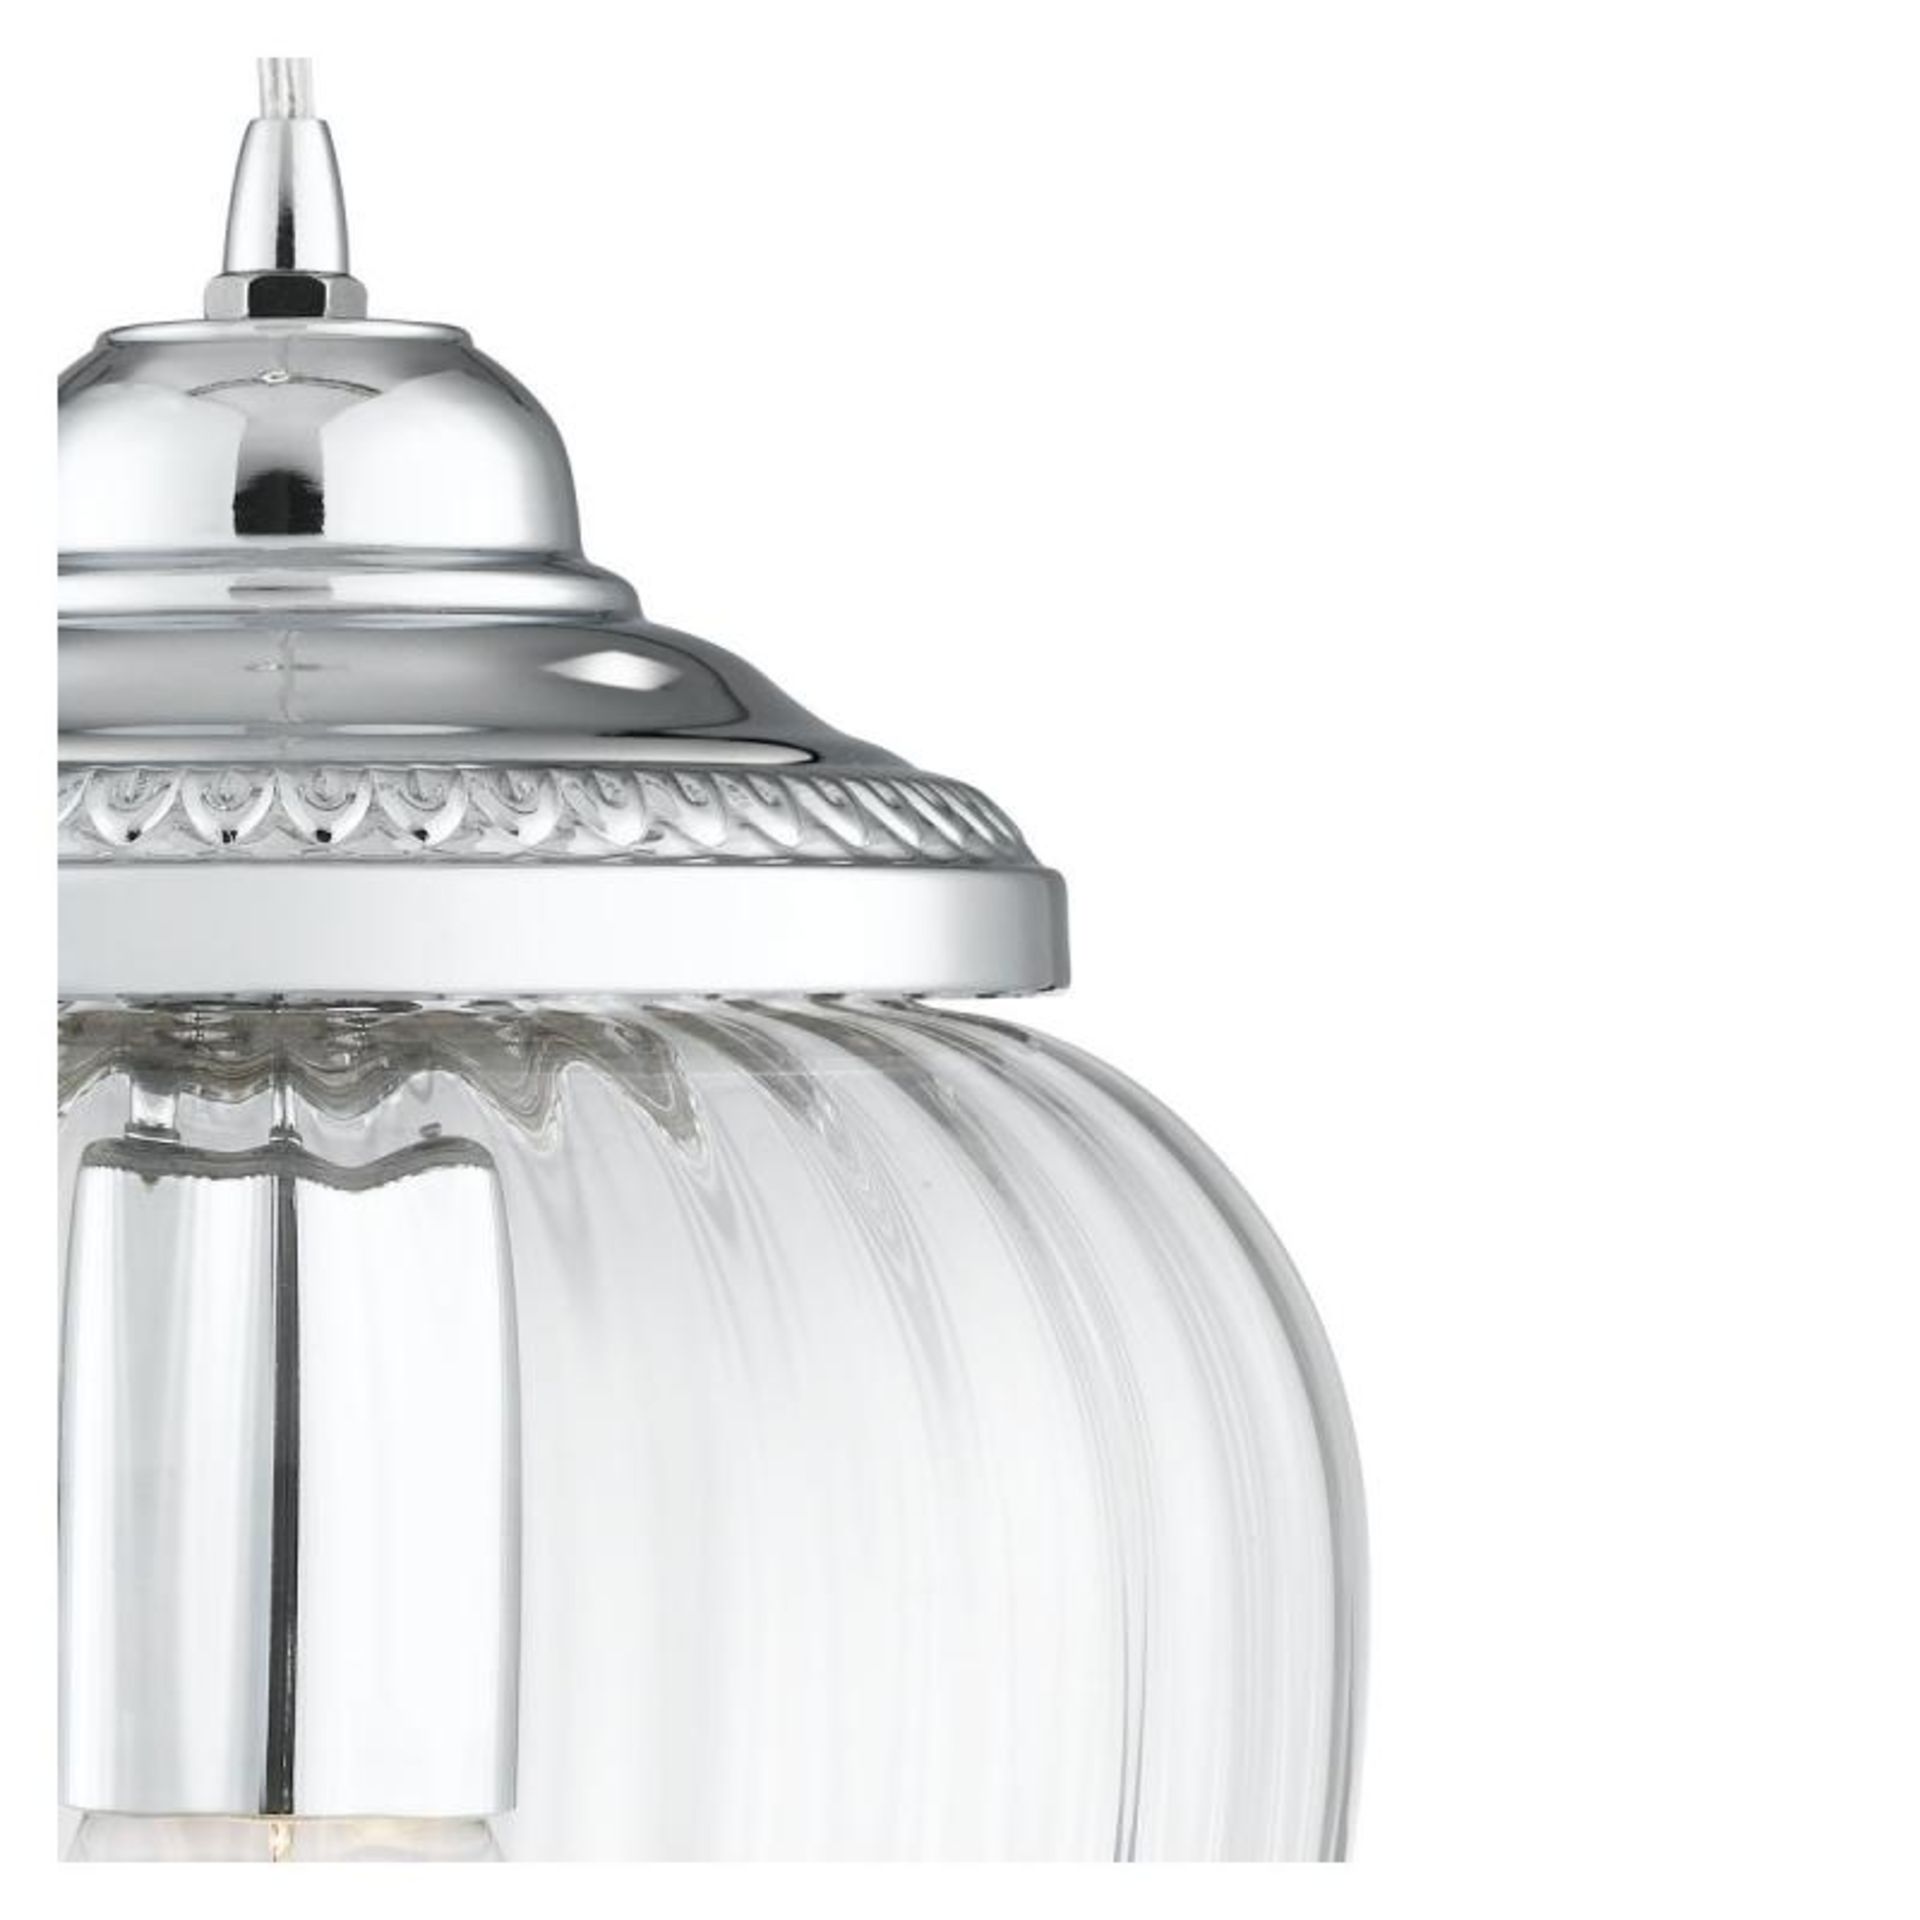 1 x Chrome Pendant Light With Clear Ribbed Optic Glass Shade - New Boxed Stock - CL323 - Ref: 1091CC - Image 3 of 3